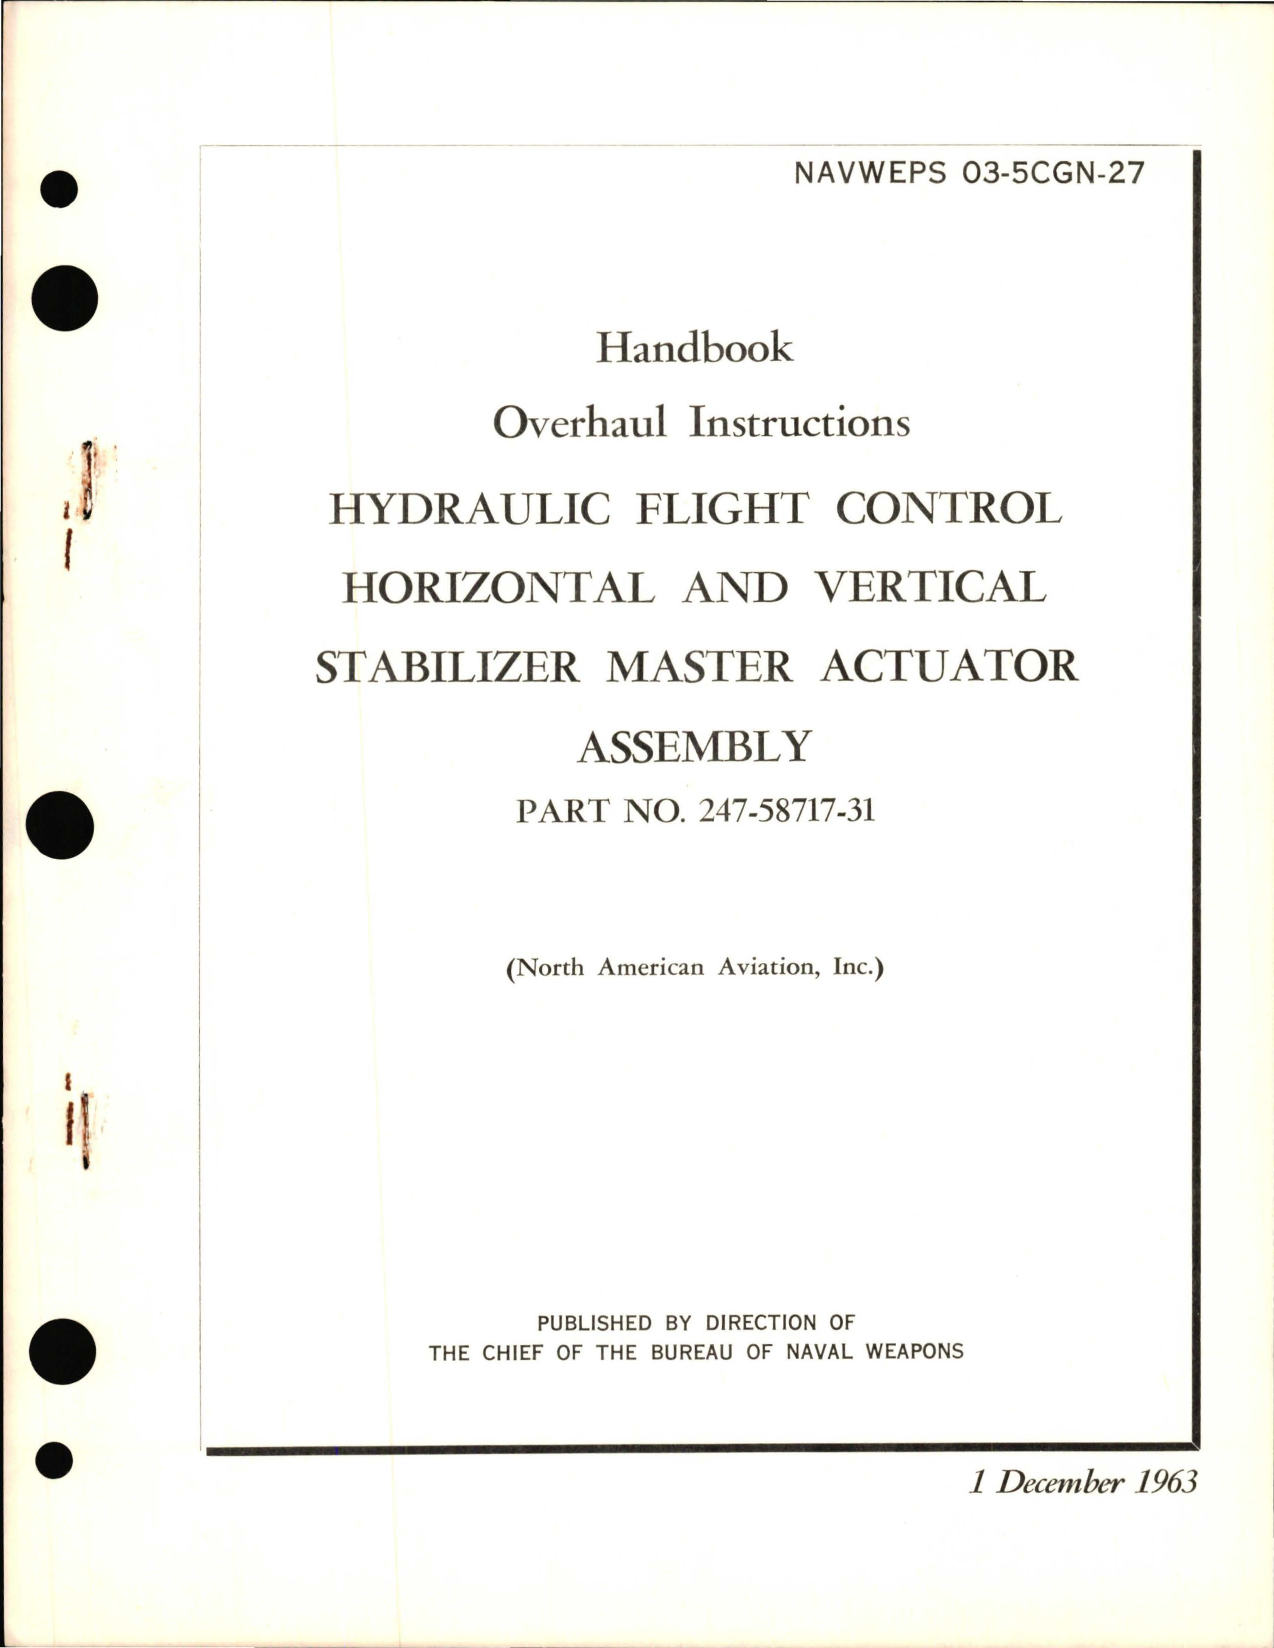 Sample page 1 from AirCorps Library document: Overhaul Instructions for Hydraulic Flight Control Horizontal and Vertical Stabilizer Master Actuator Assembly - Part 247-58717-31